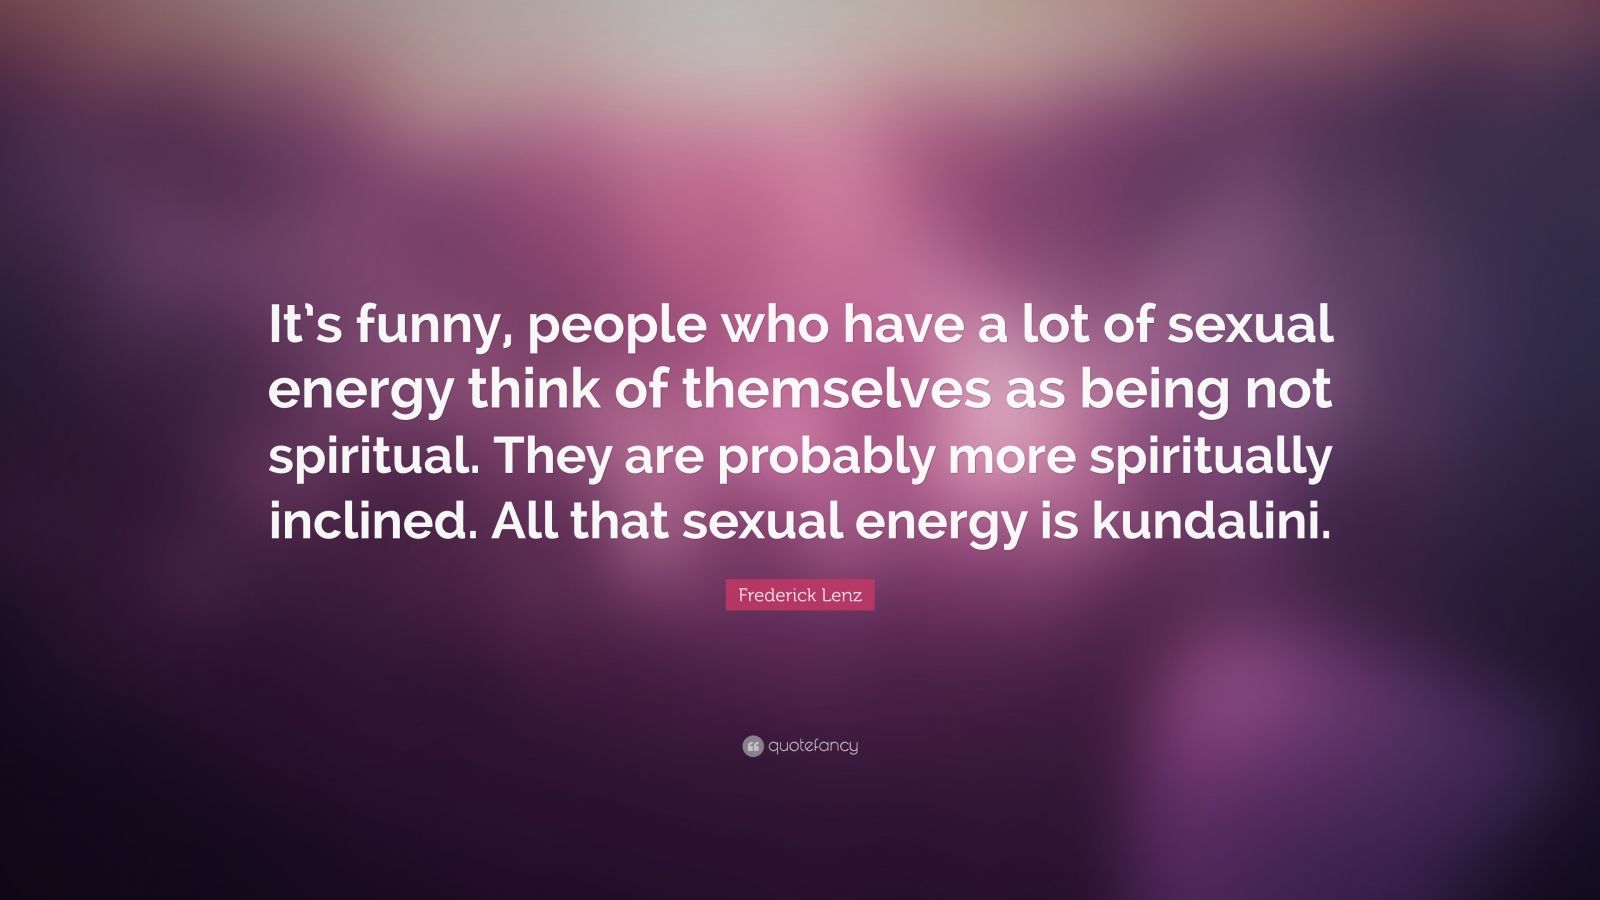 Frederick Lenz Quote “it’s Funny People Who Have A Lot Of Sexual Energy Think Of Themselves As